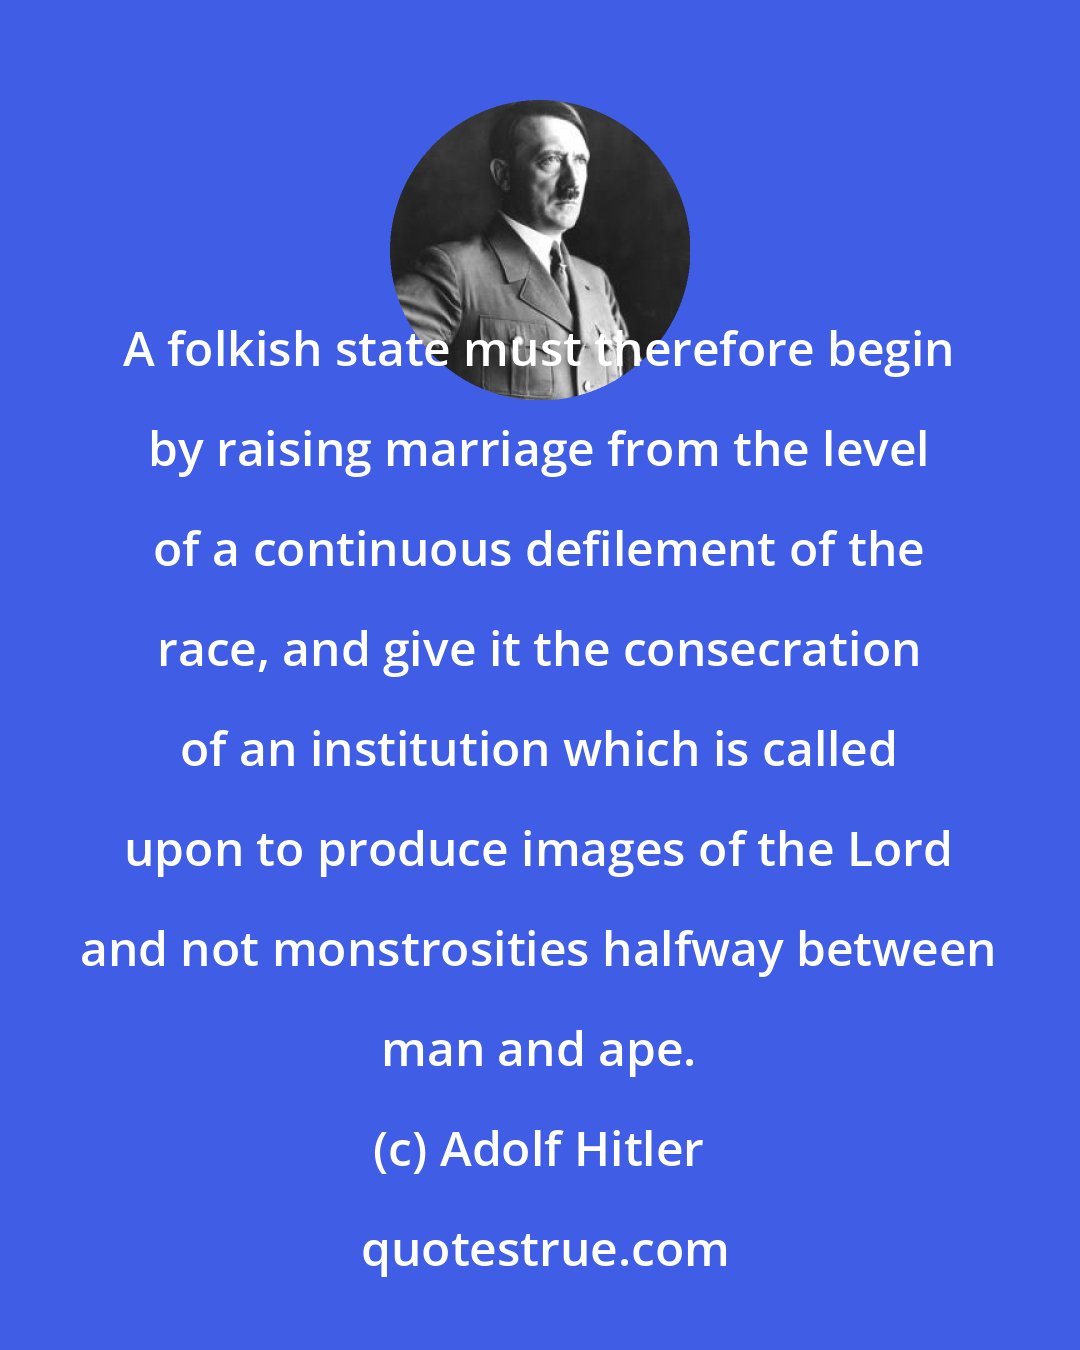 Adolf Hitler: A folkish state must therefore begin by raising marriage from the level of a continuous defilement of the race, and give it the consecration of an institution which is called upon to produce images of the Lord and not monstrosities halfway between man and ape.